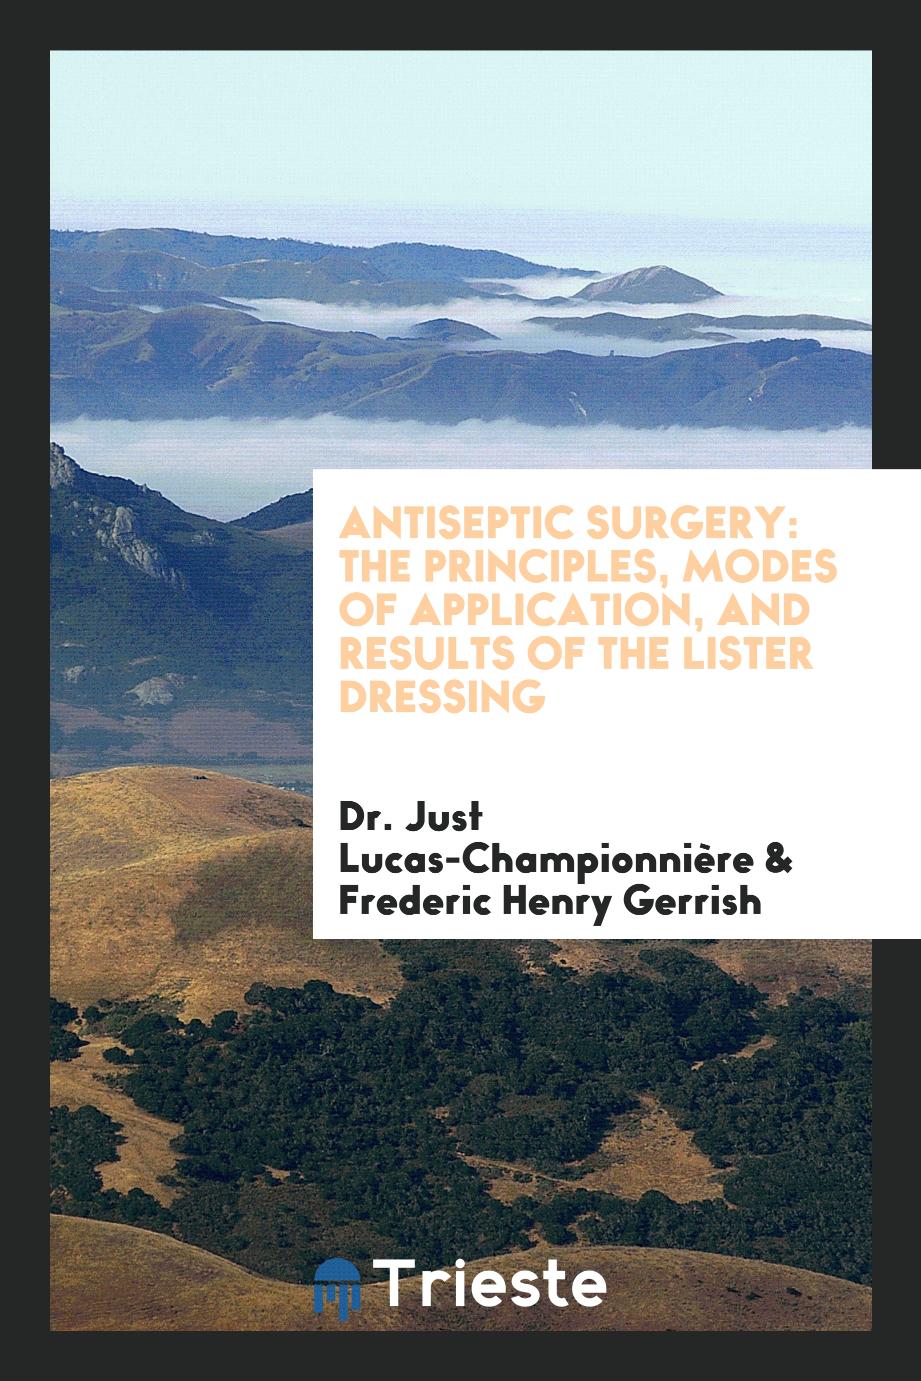 Antiseptic surgery: The Principles, Modes of Application, and Results of the Lister Dressing